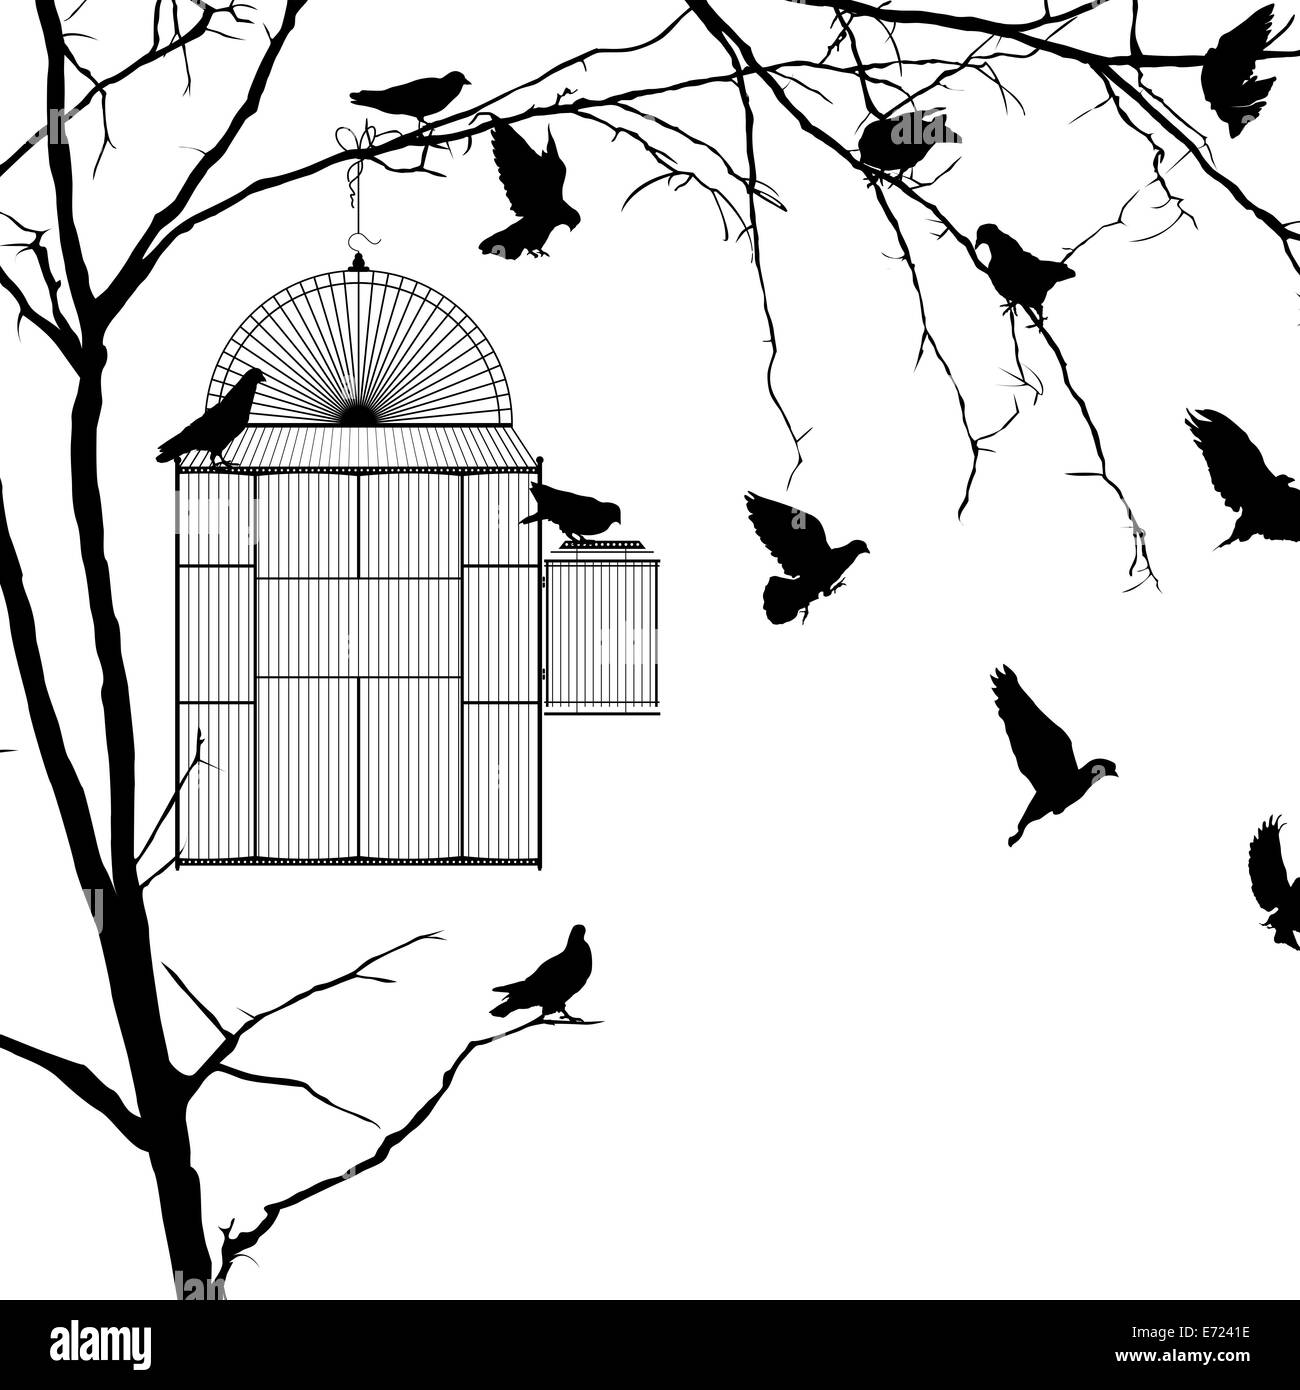 Bird cage silhouette over white background Stock Photo